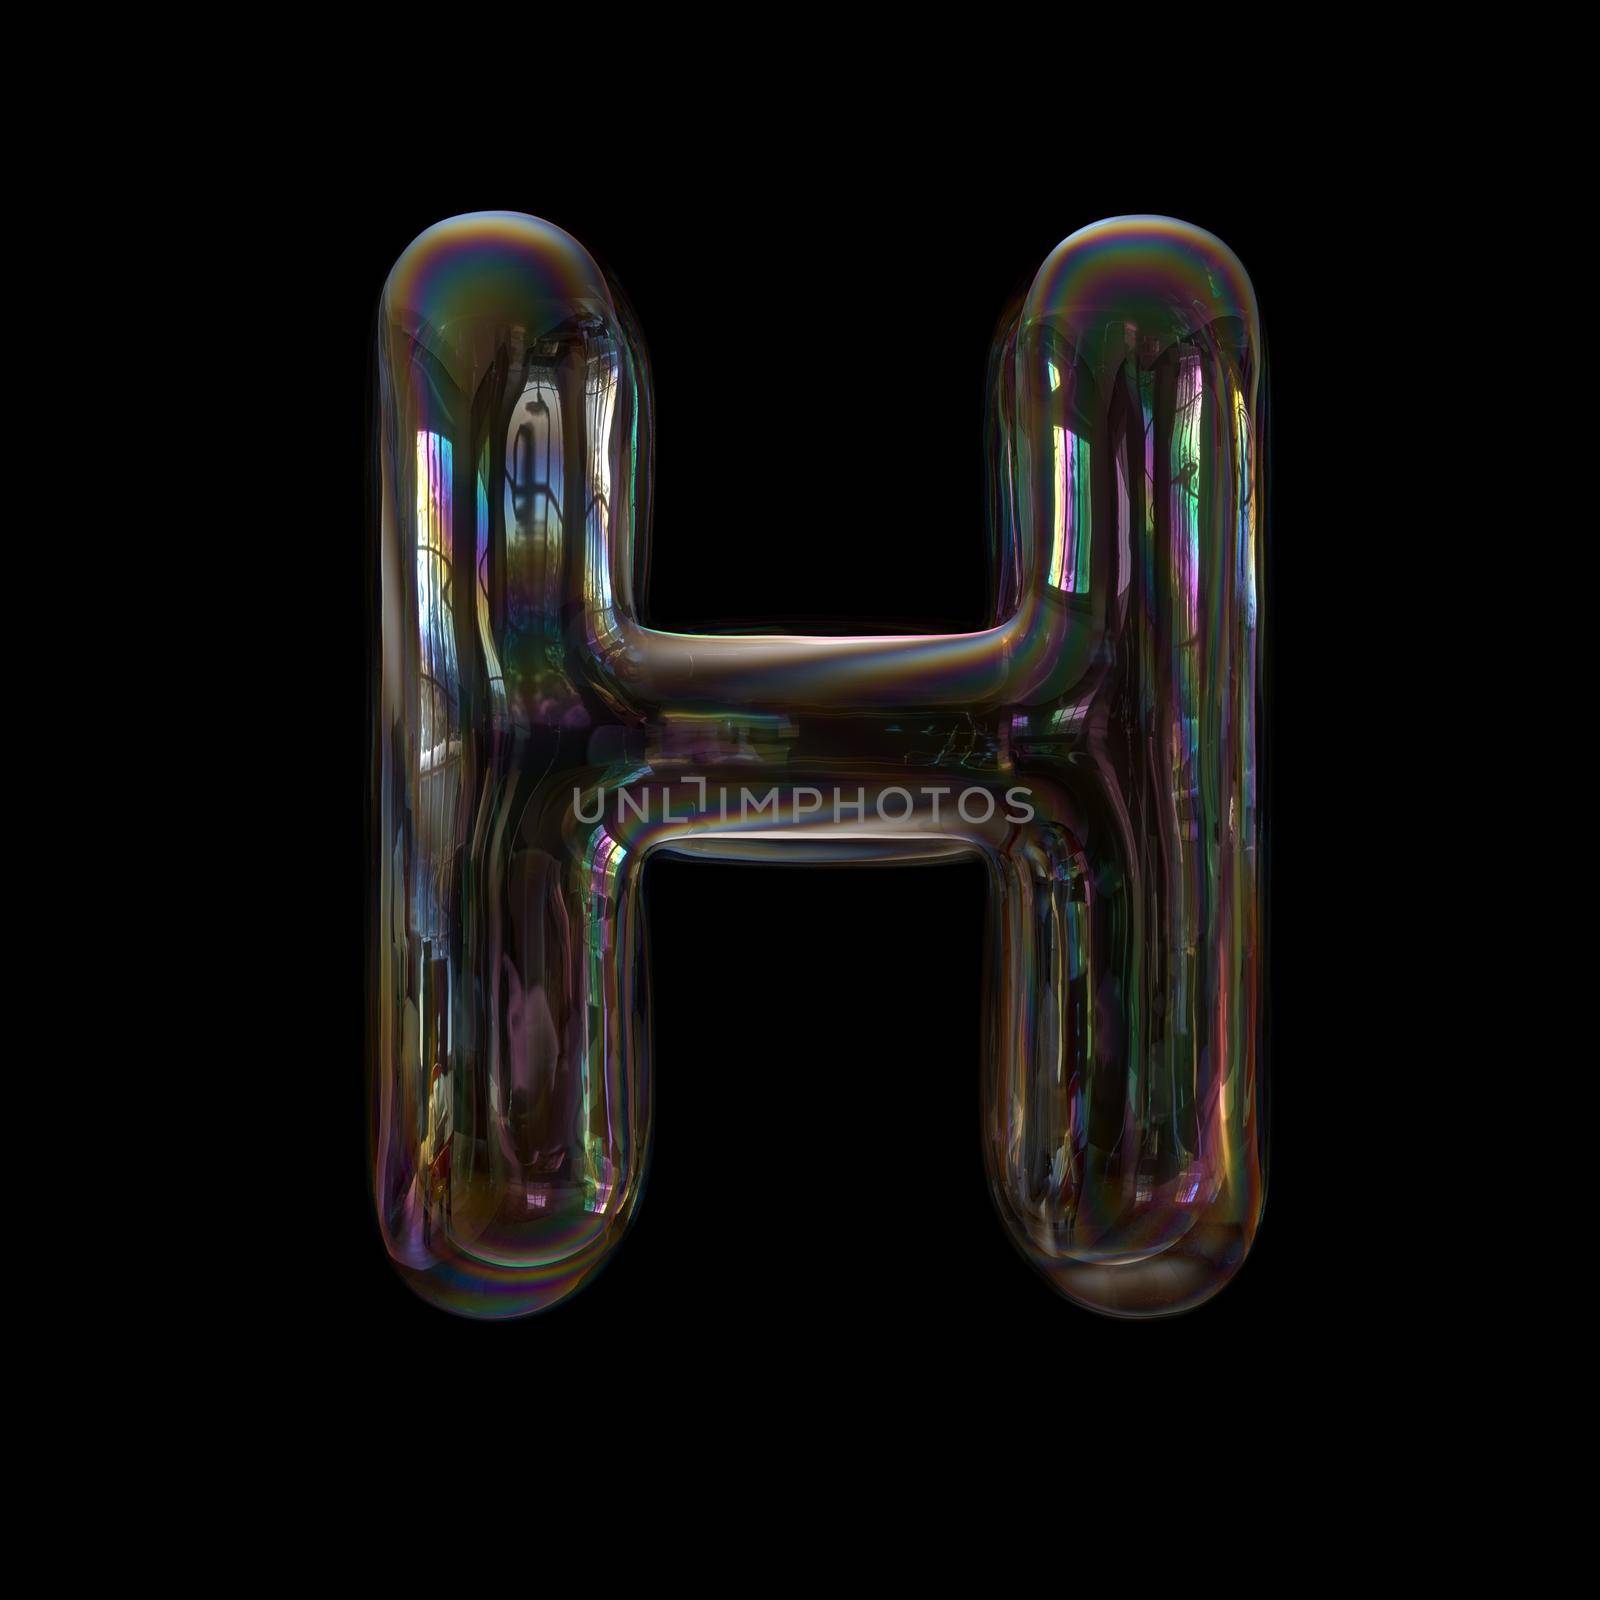 bubble writing alphabet letter H - Upper-case 3d font isolated on a black background.
This 3d font collection is well-suited for various creative projects including but not limited to : Childhood. events. nature...